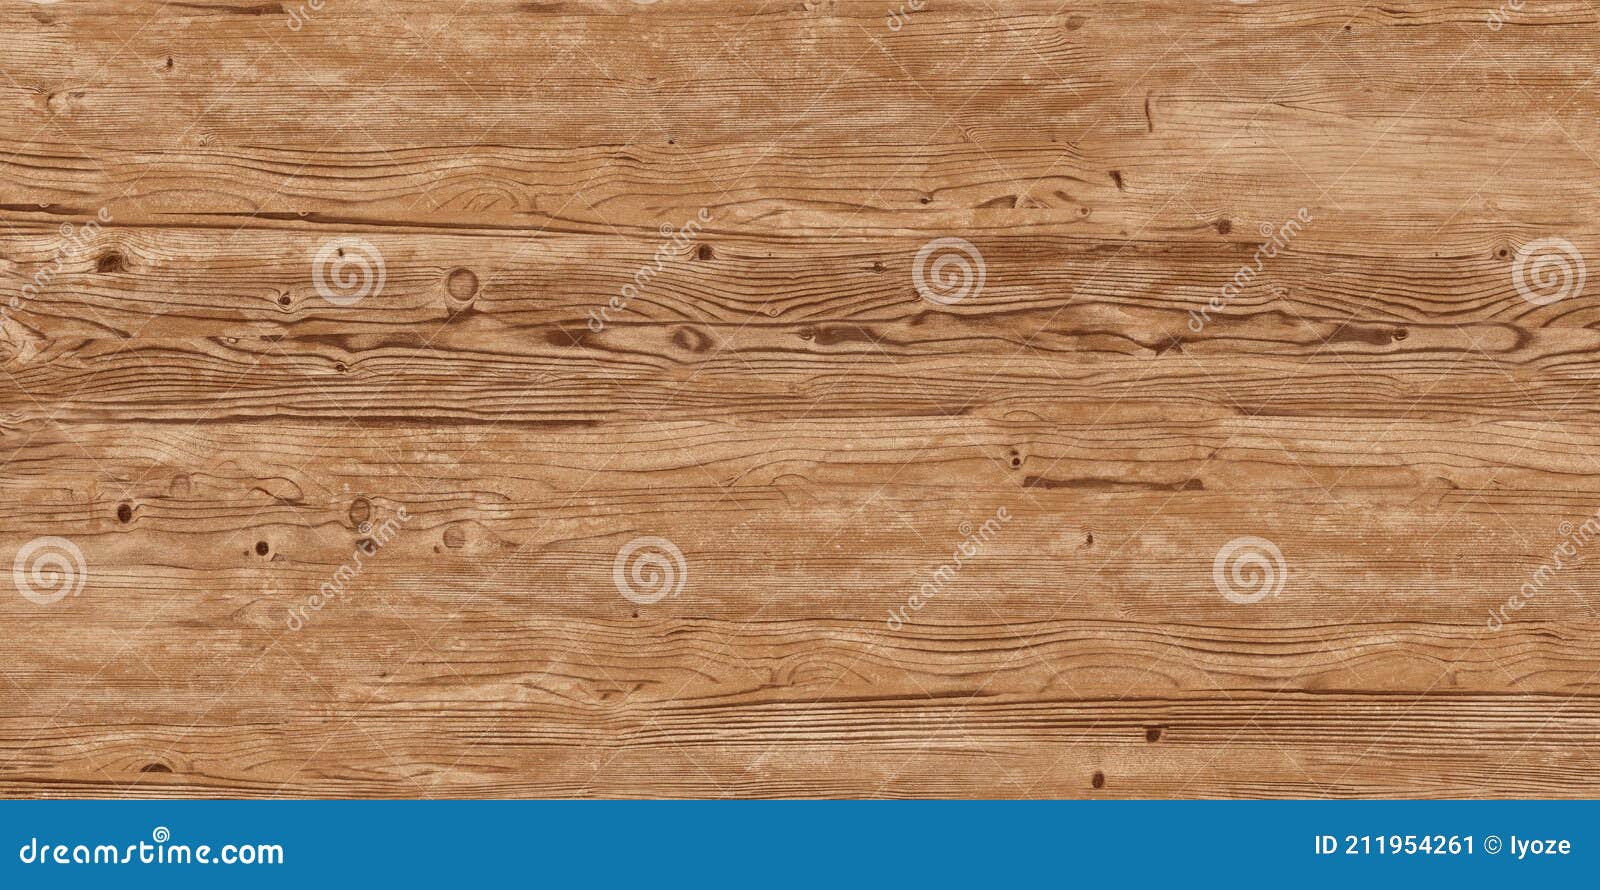 Wood Texture High Resolution for Background Stock Image - Image of lumber,  grain: 211954261